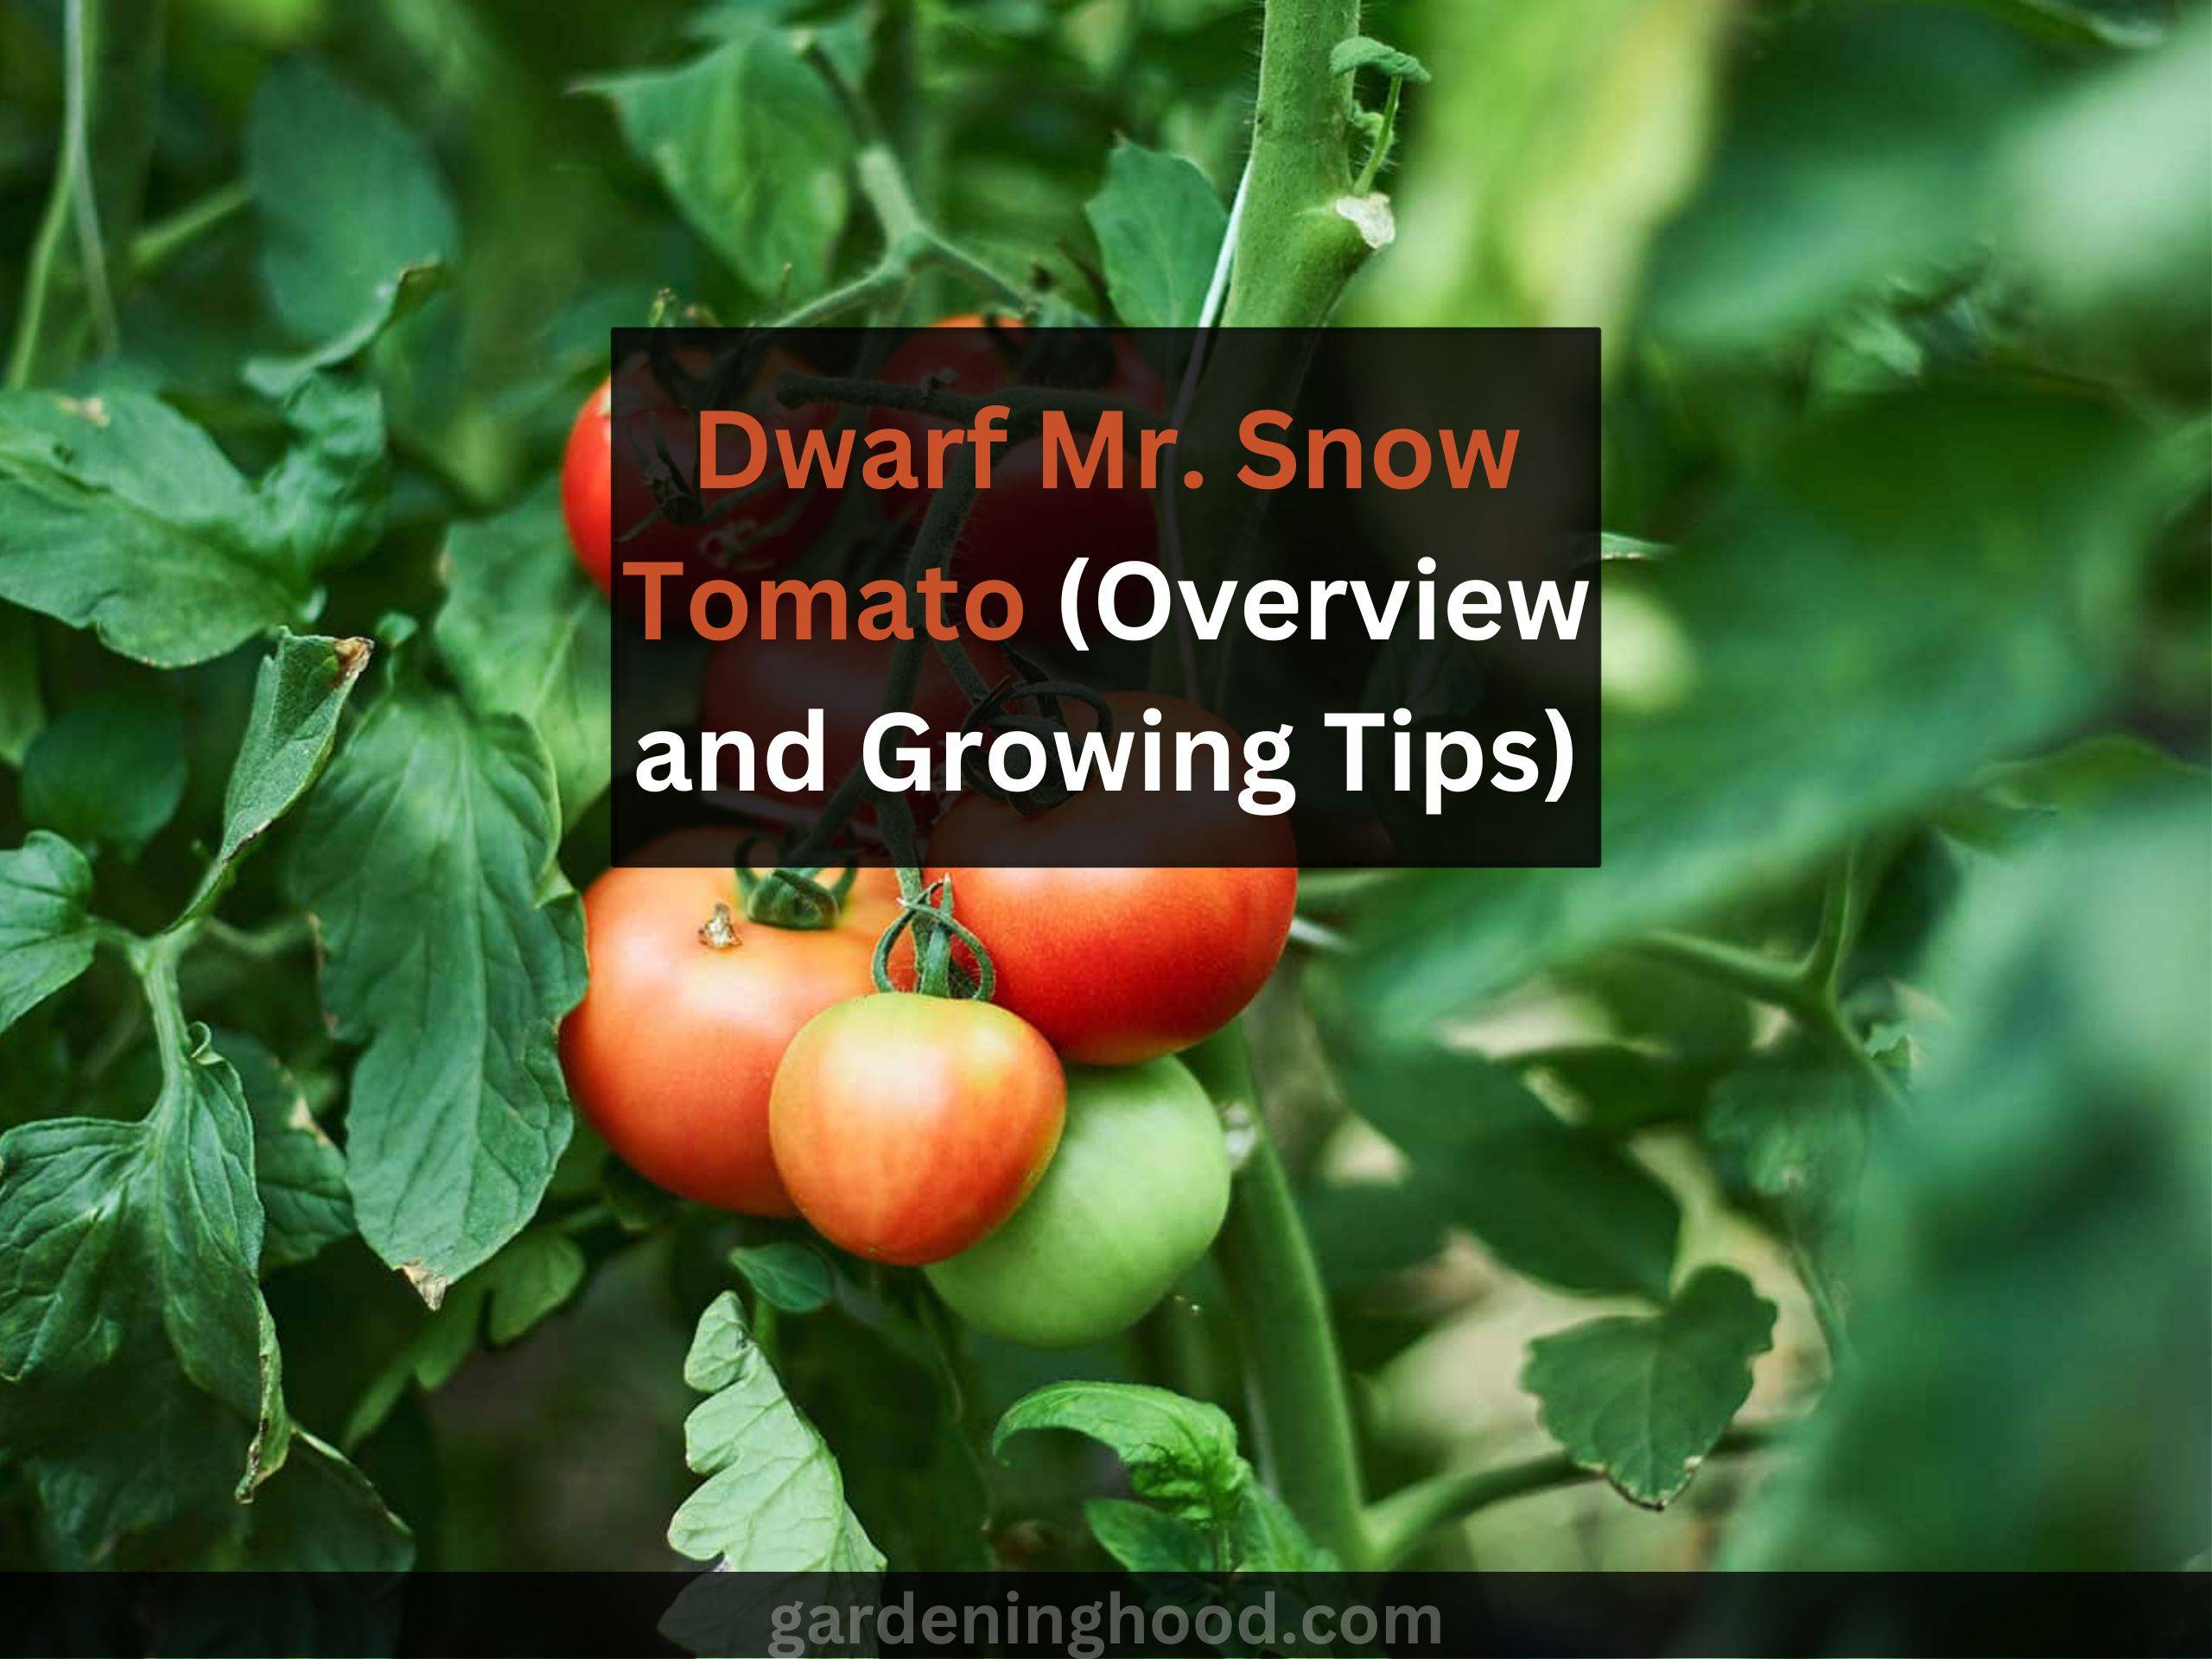 Dwarf Mr. Snow Tomato (Overview and Growing Tips)